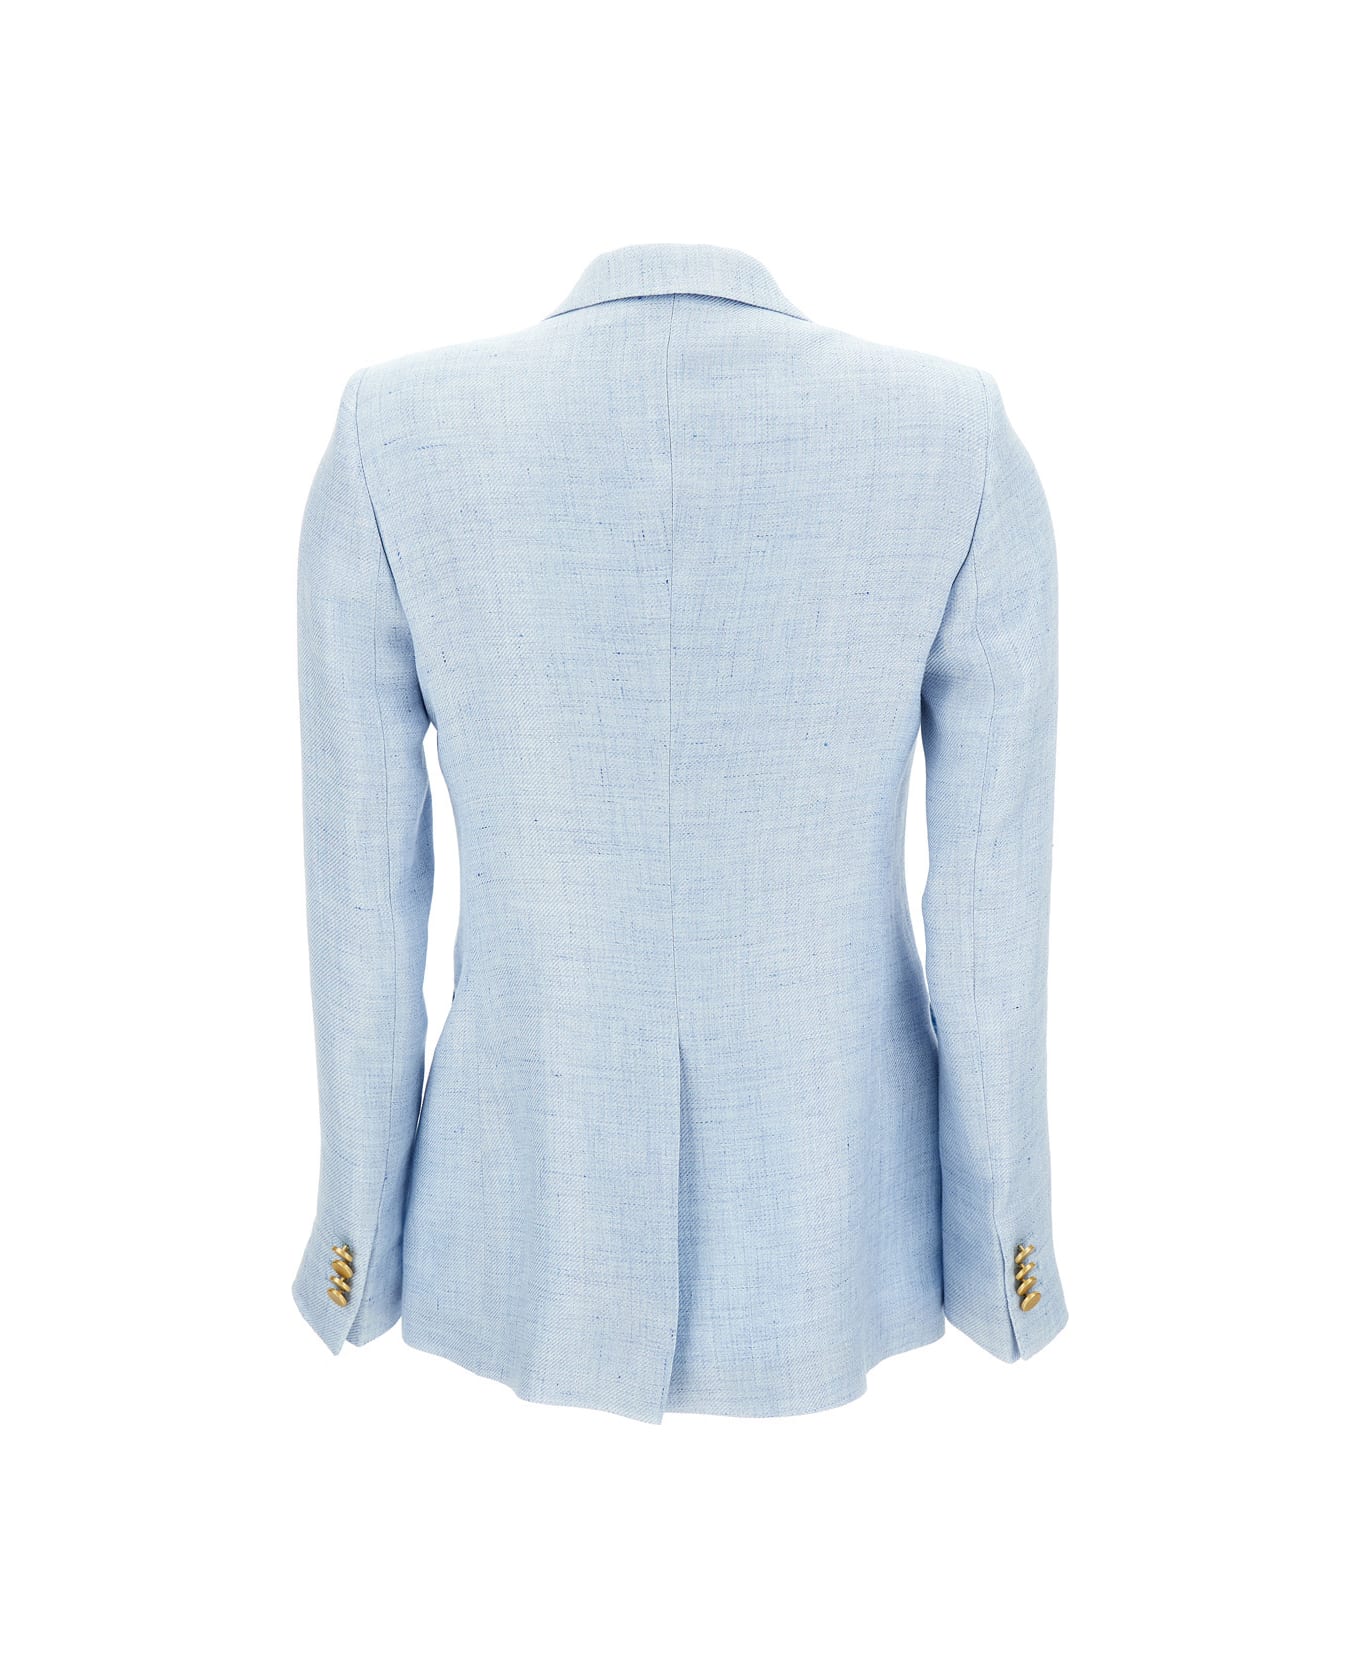 Tagliatore Light Blue Double-breasted Jacket With Golden Buttons In Linen Blend Woman - Light blue